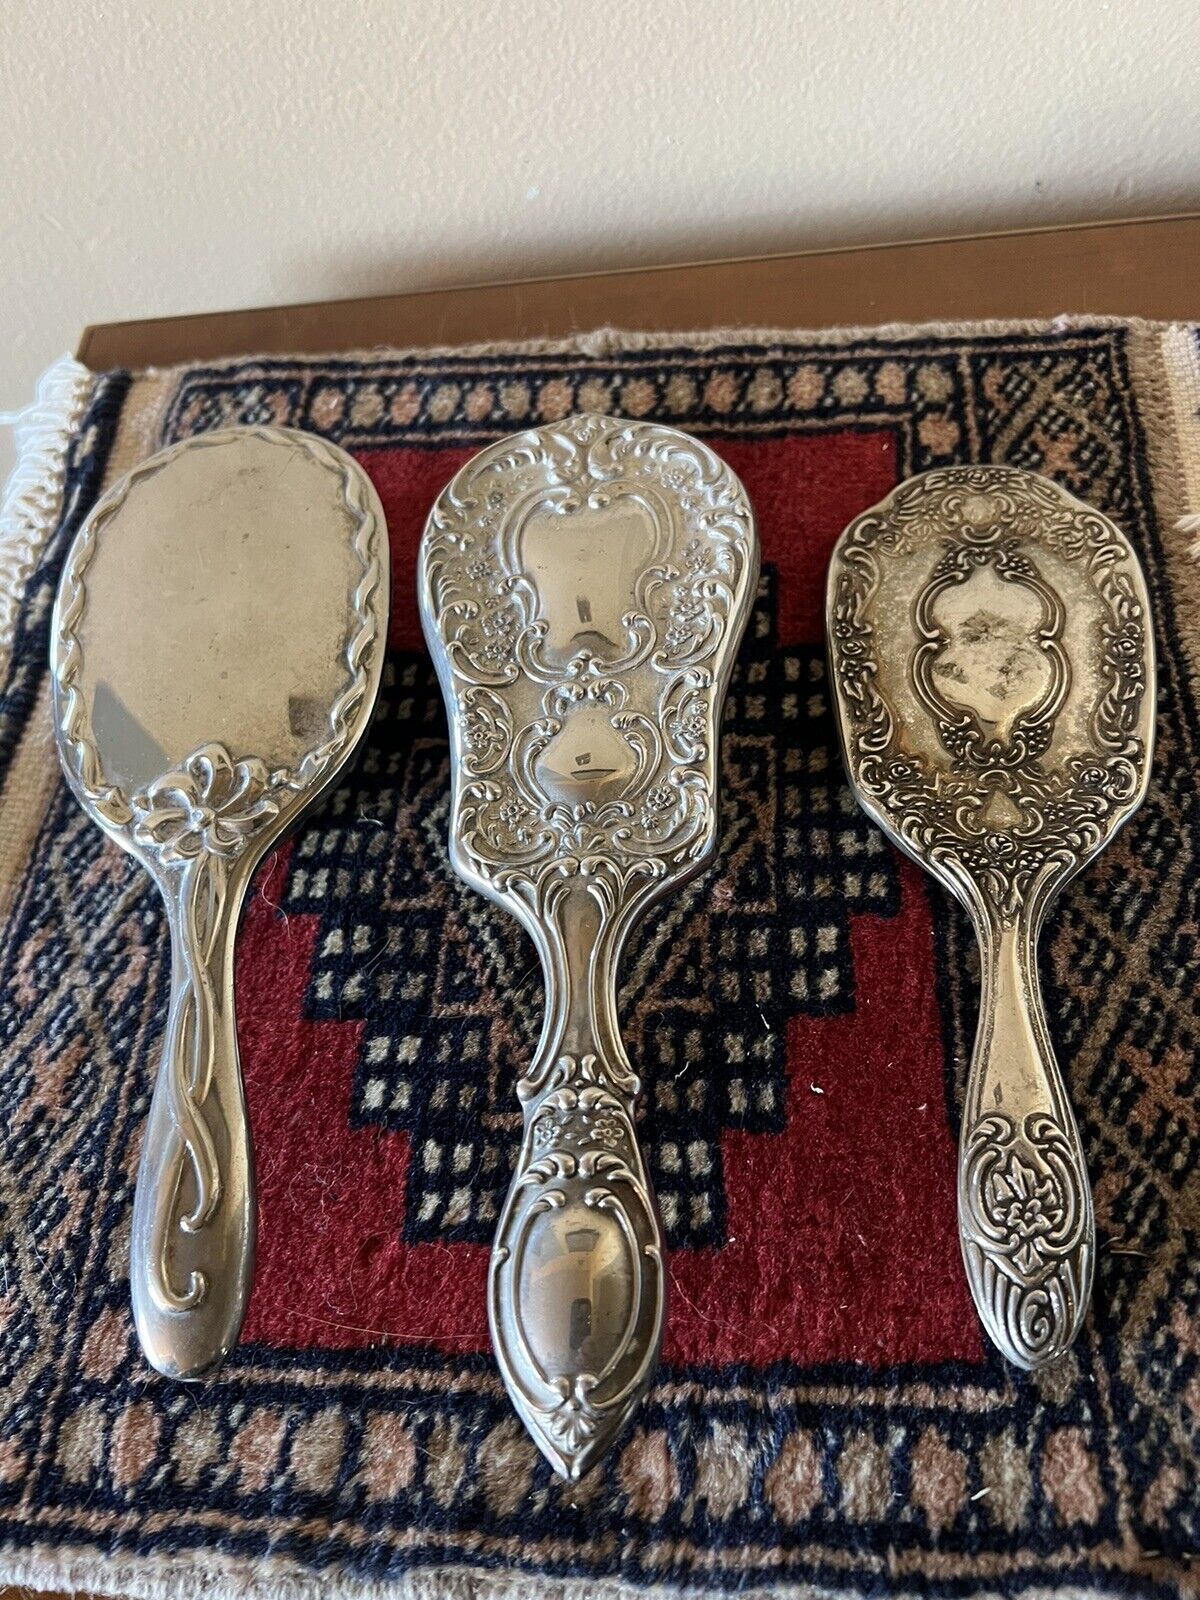 Hair Brush paddle Silver Plate Antique Floral Heavy Ornate Embossed